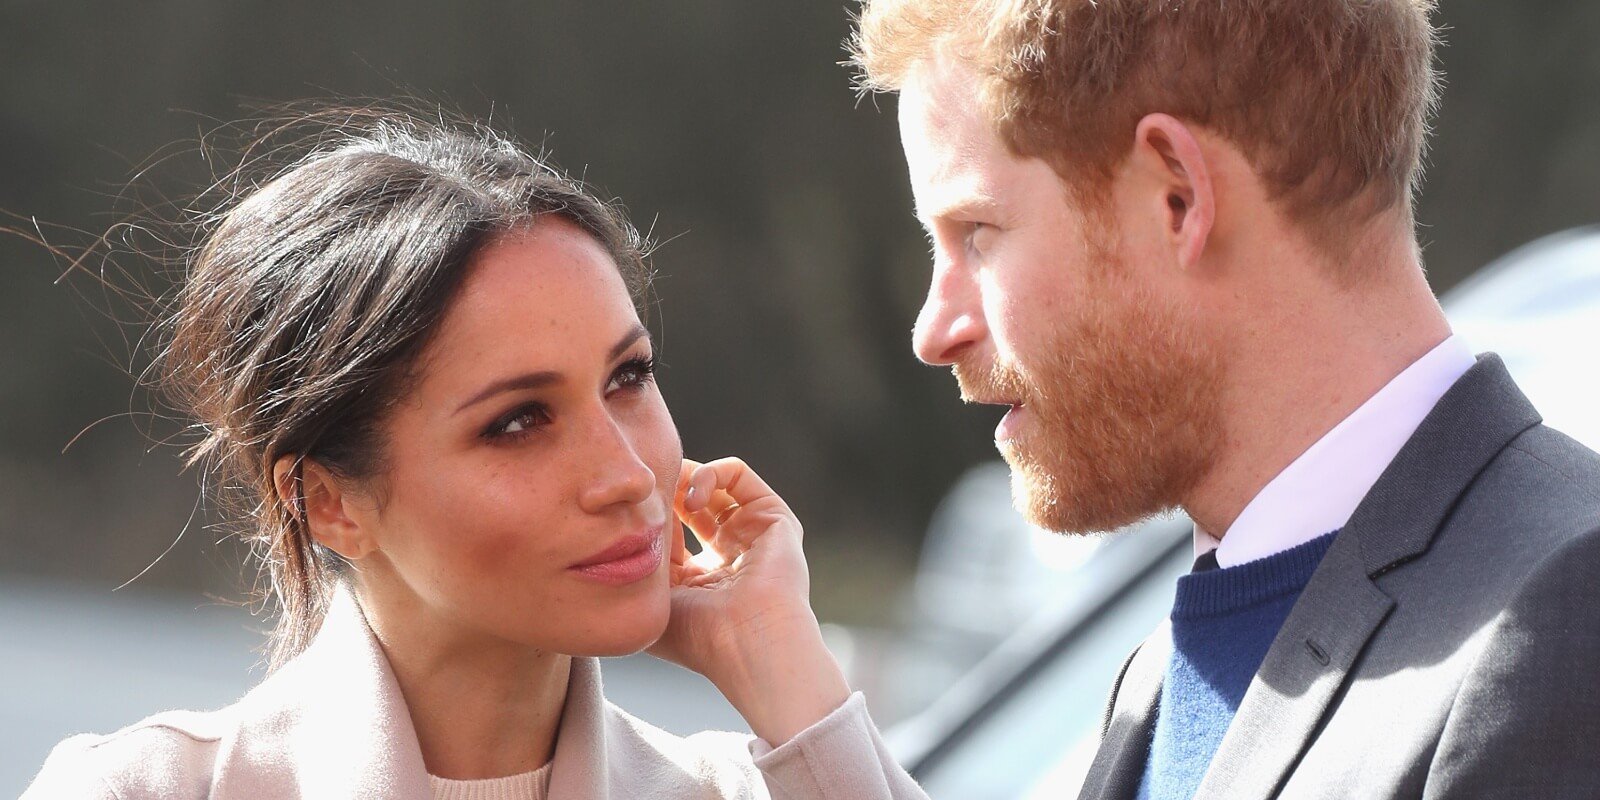 Meghan Markle looks at Prince Harry on March 23, 2018 in Lisburn, Nothern Ireland.